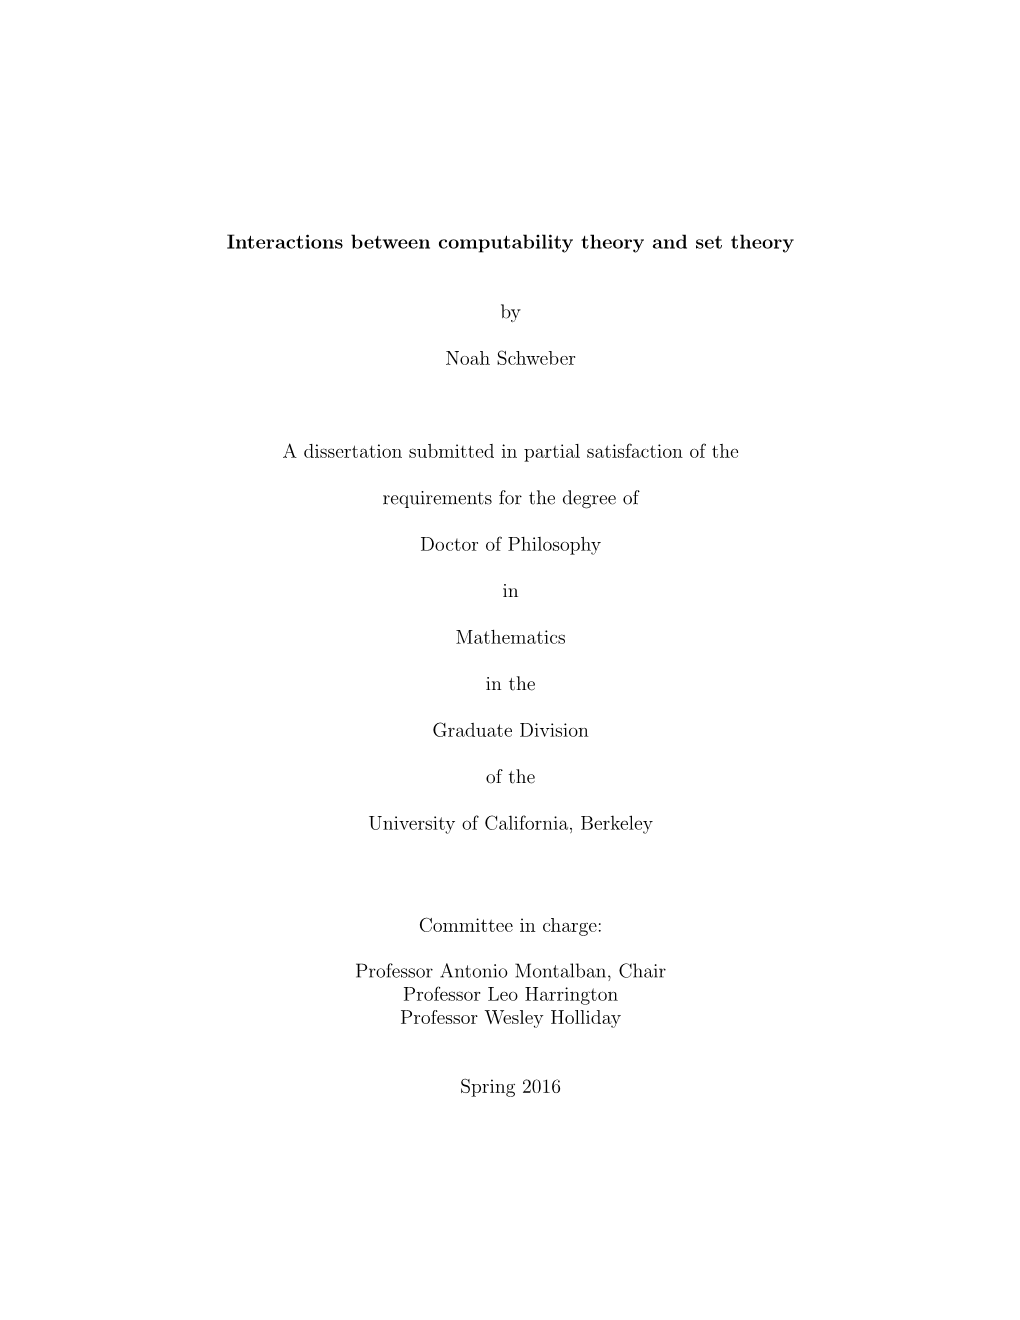 Interactions Between Computability Theory and Set Theory by Noah